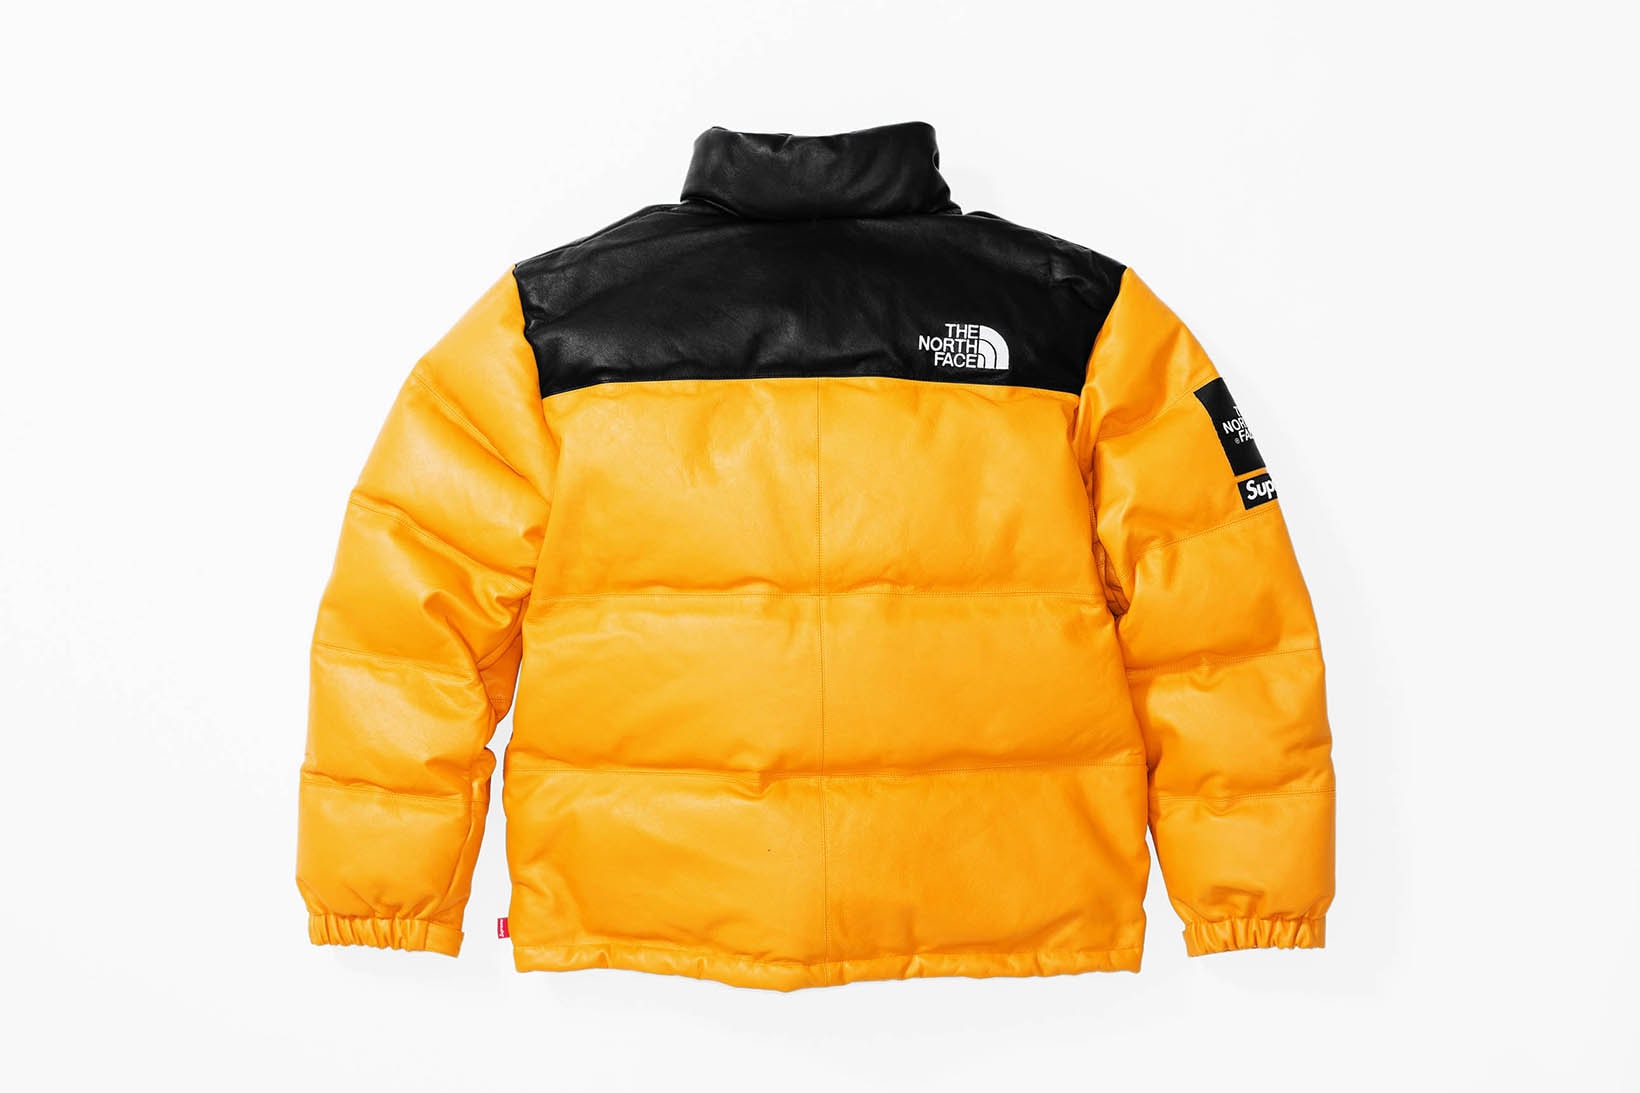 Supreme x The North Face 2017 Fall Yellow Jacket